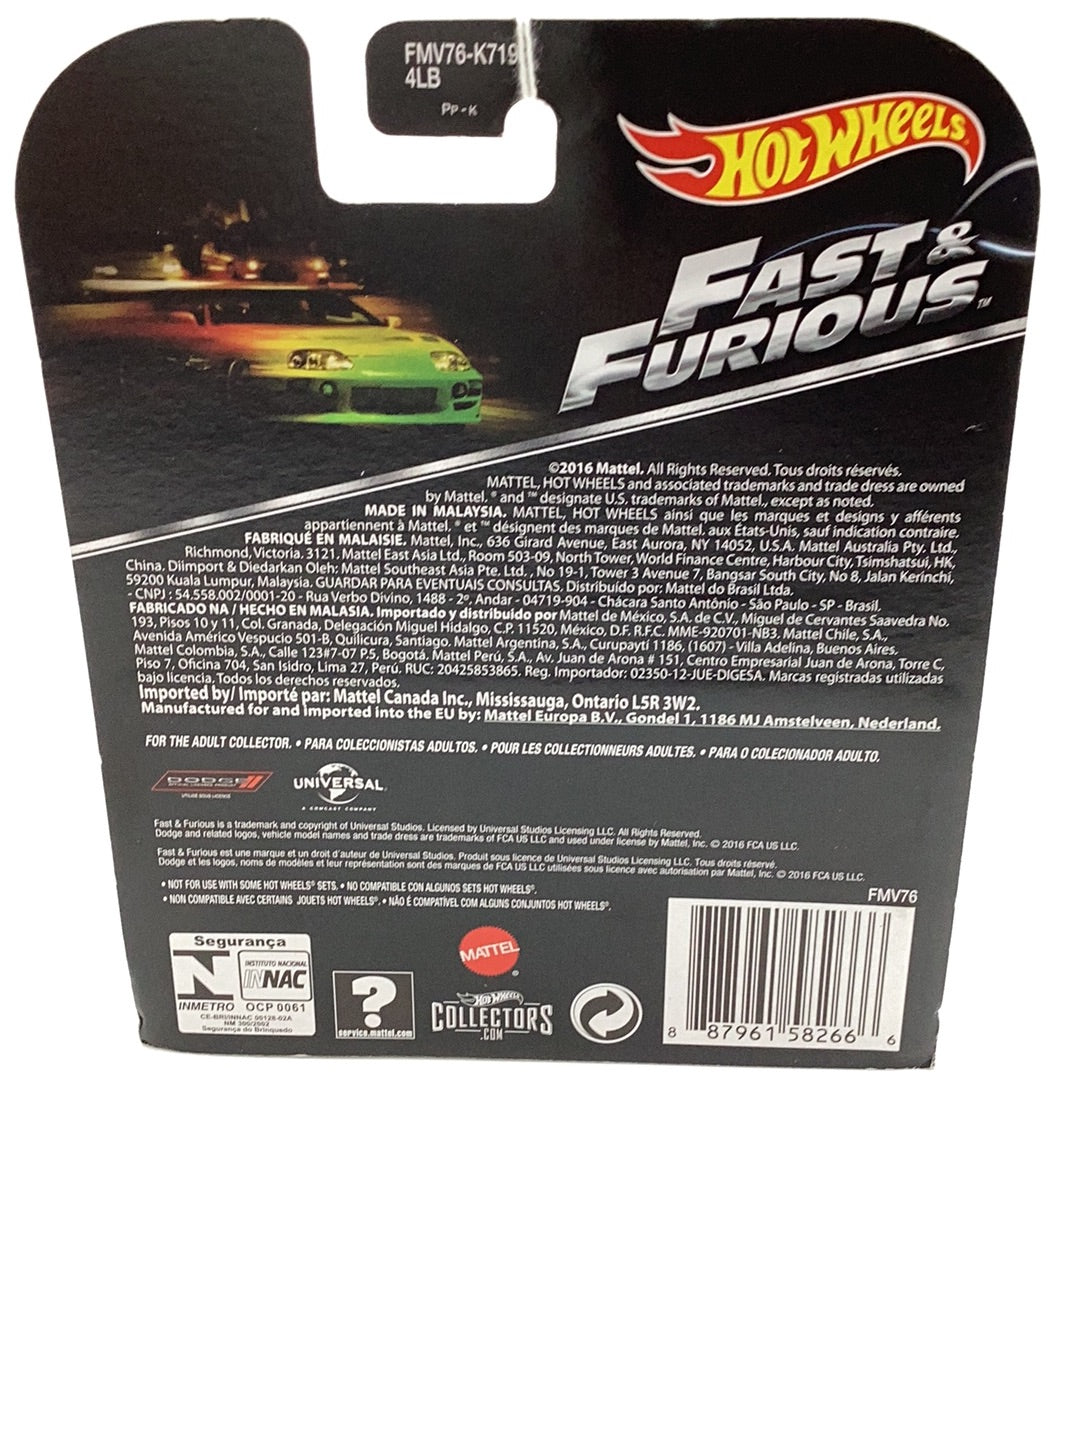 Hot wheels retro entertainment Fast & Furious 70 Dodge Charger R/T 263F